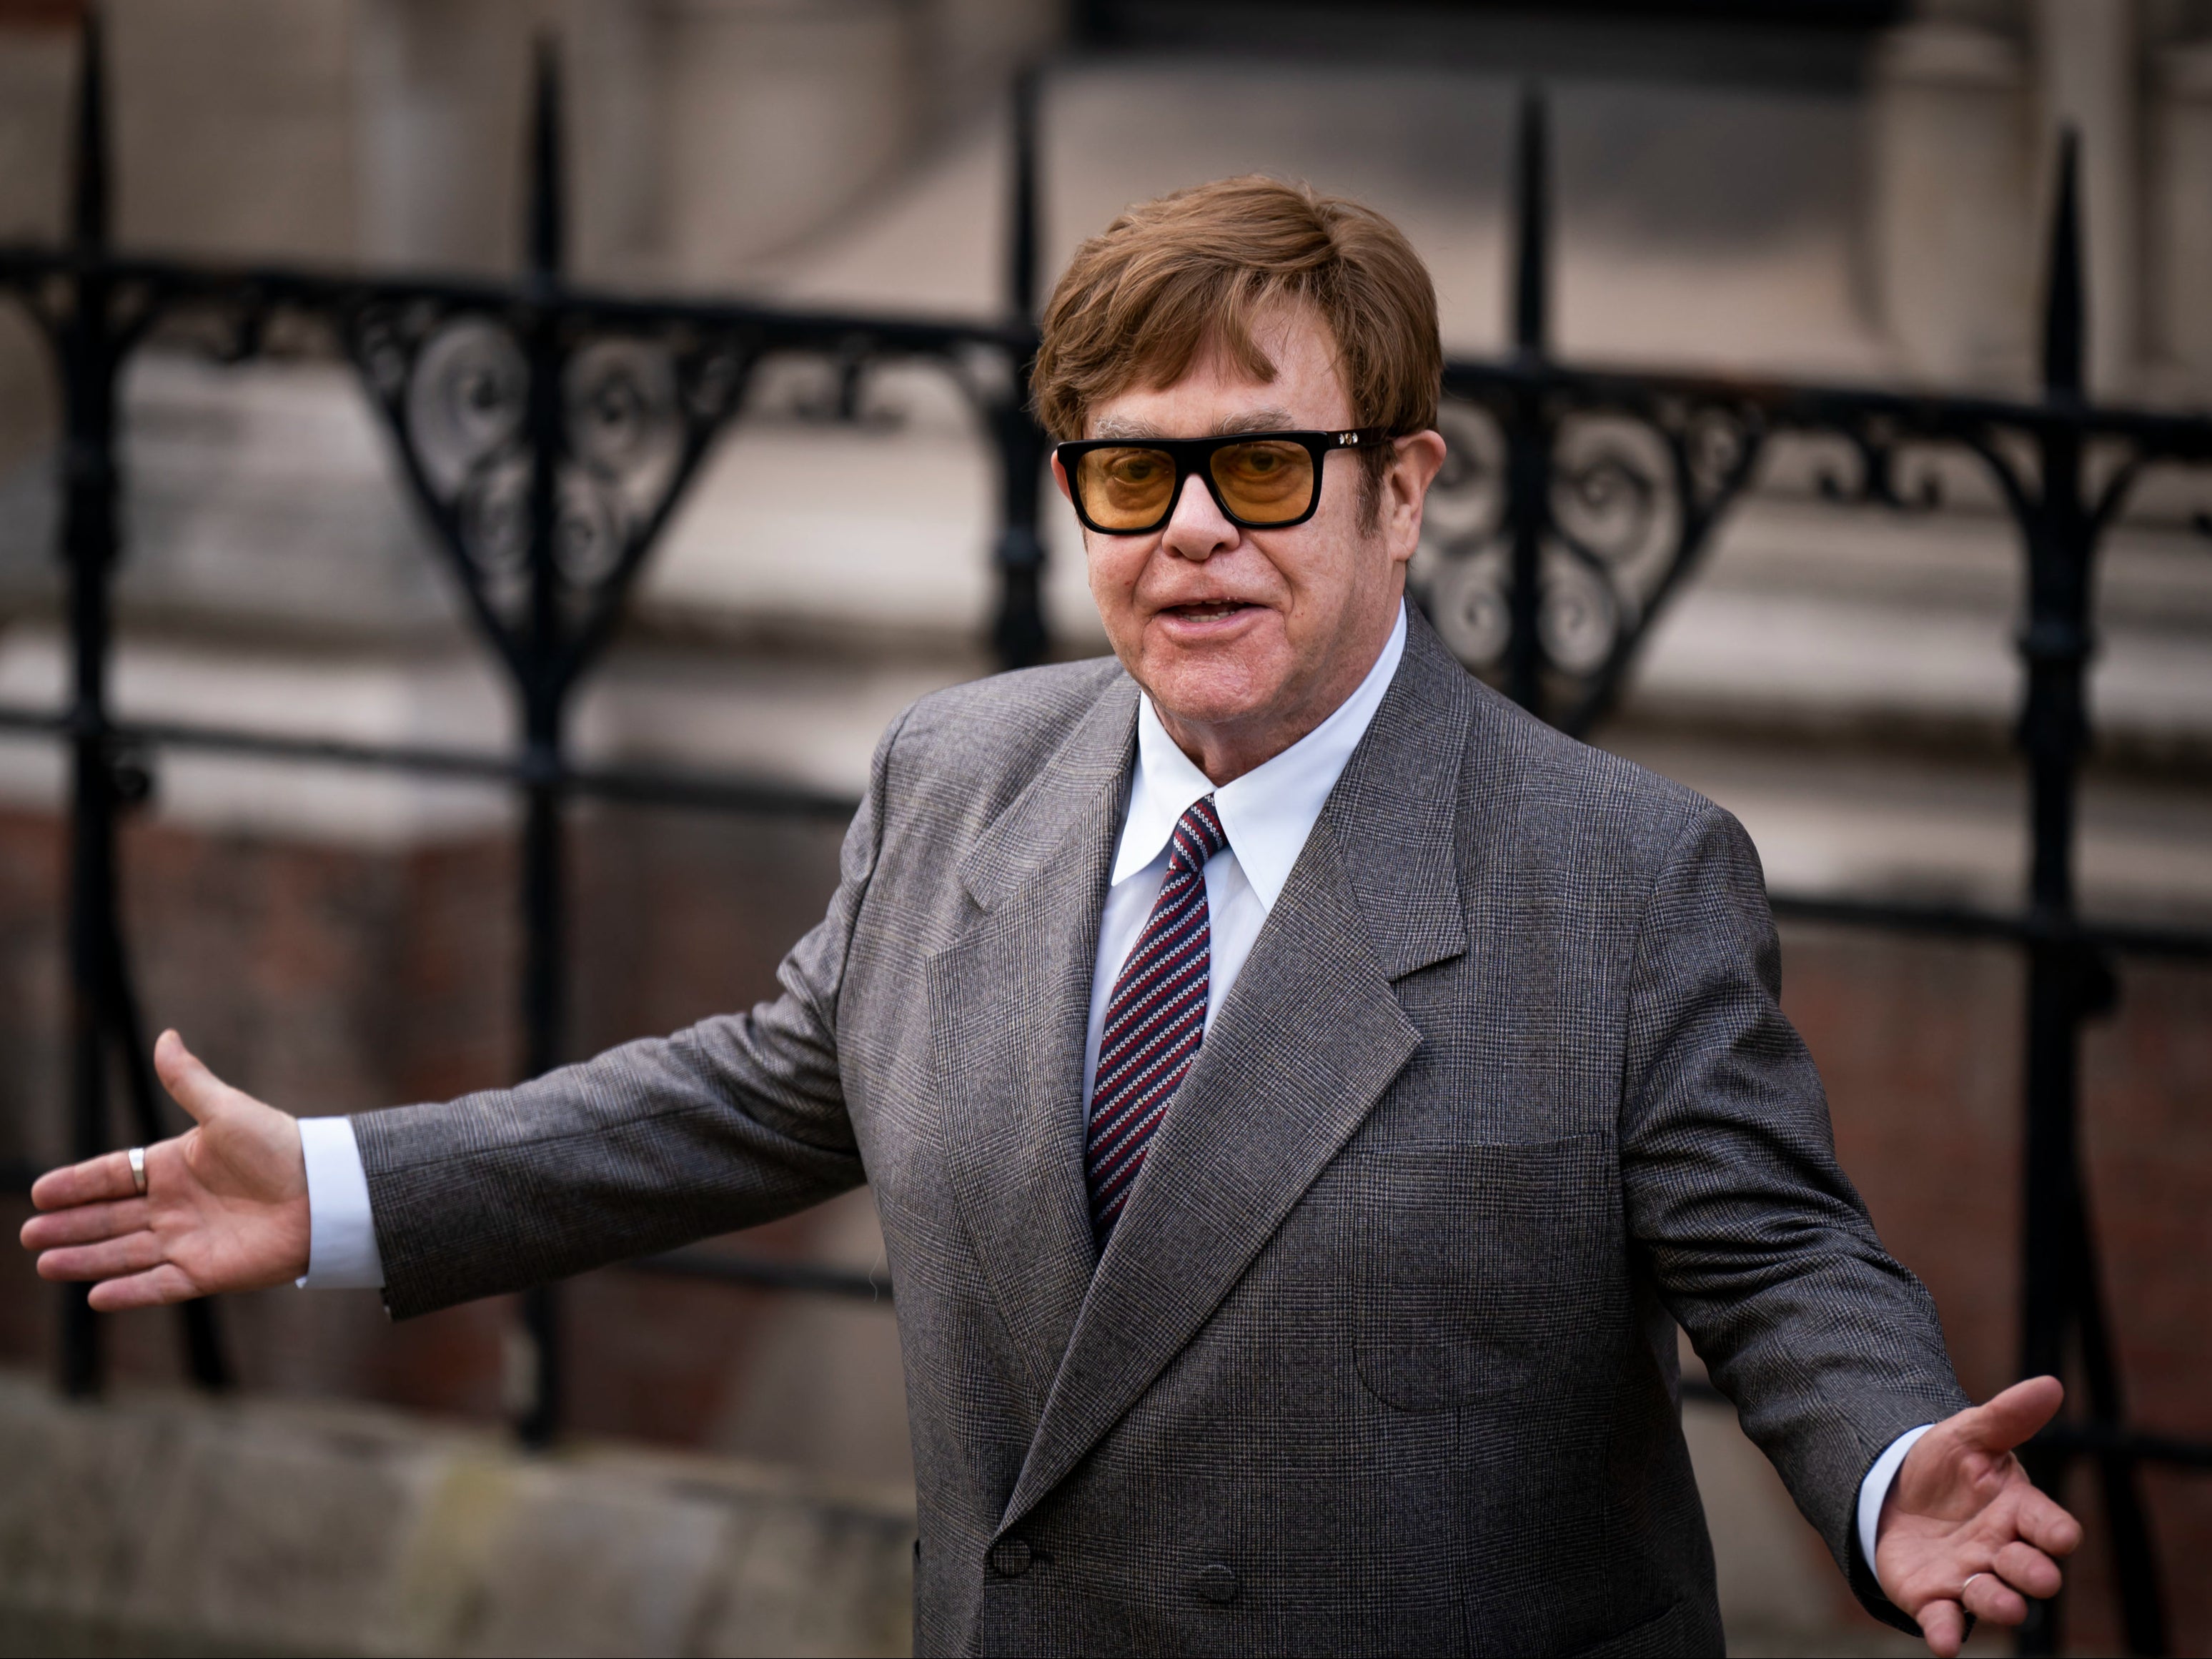 Sir Elton John attended the preliminary hearing at the Royal Courts Of Justice on Monday